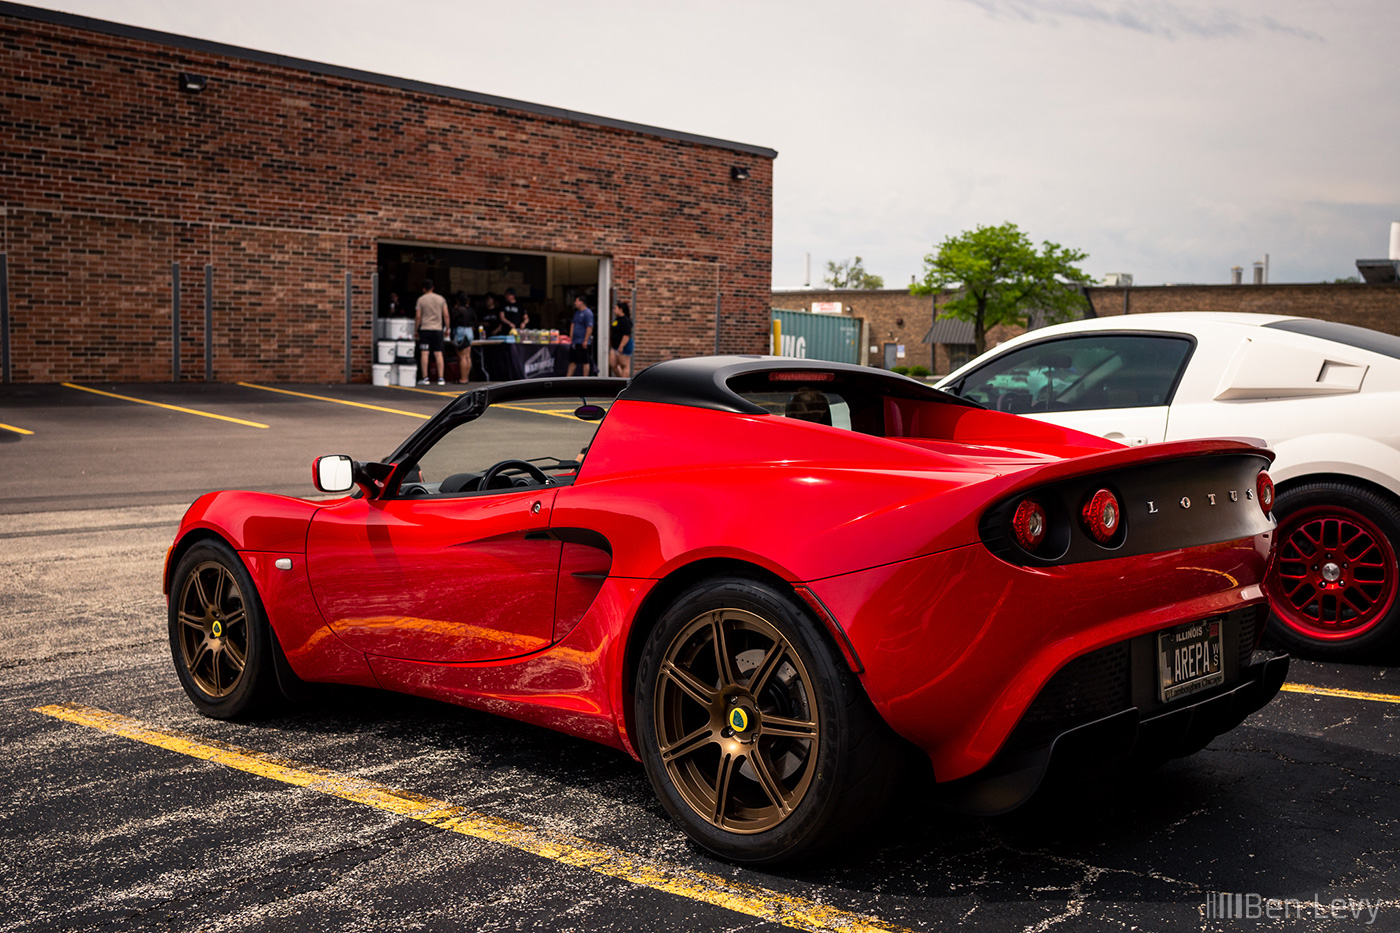 Red Lotus Elise at Chicago Auto Pros